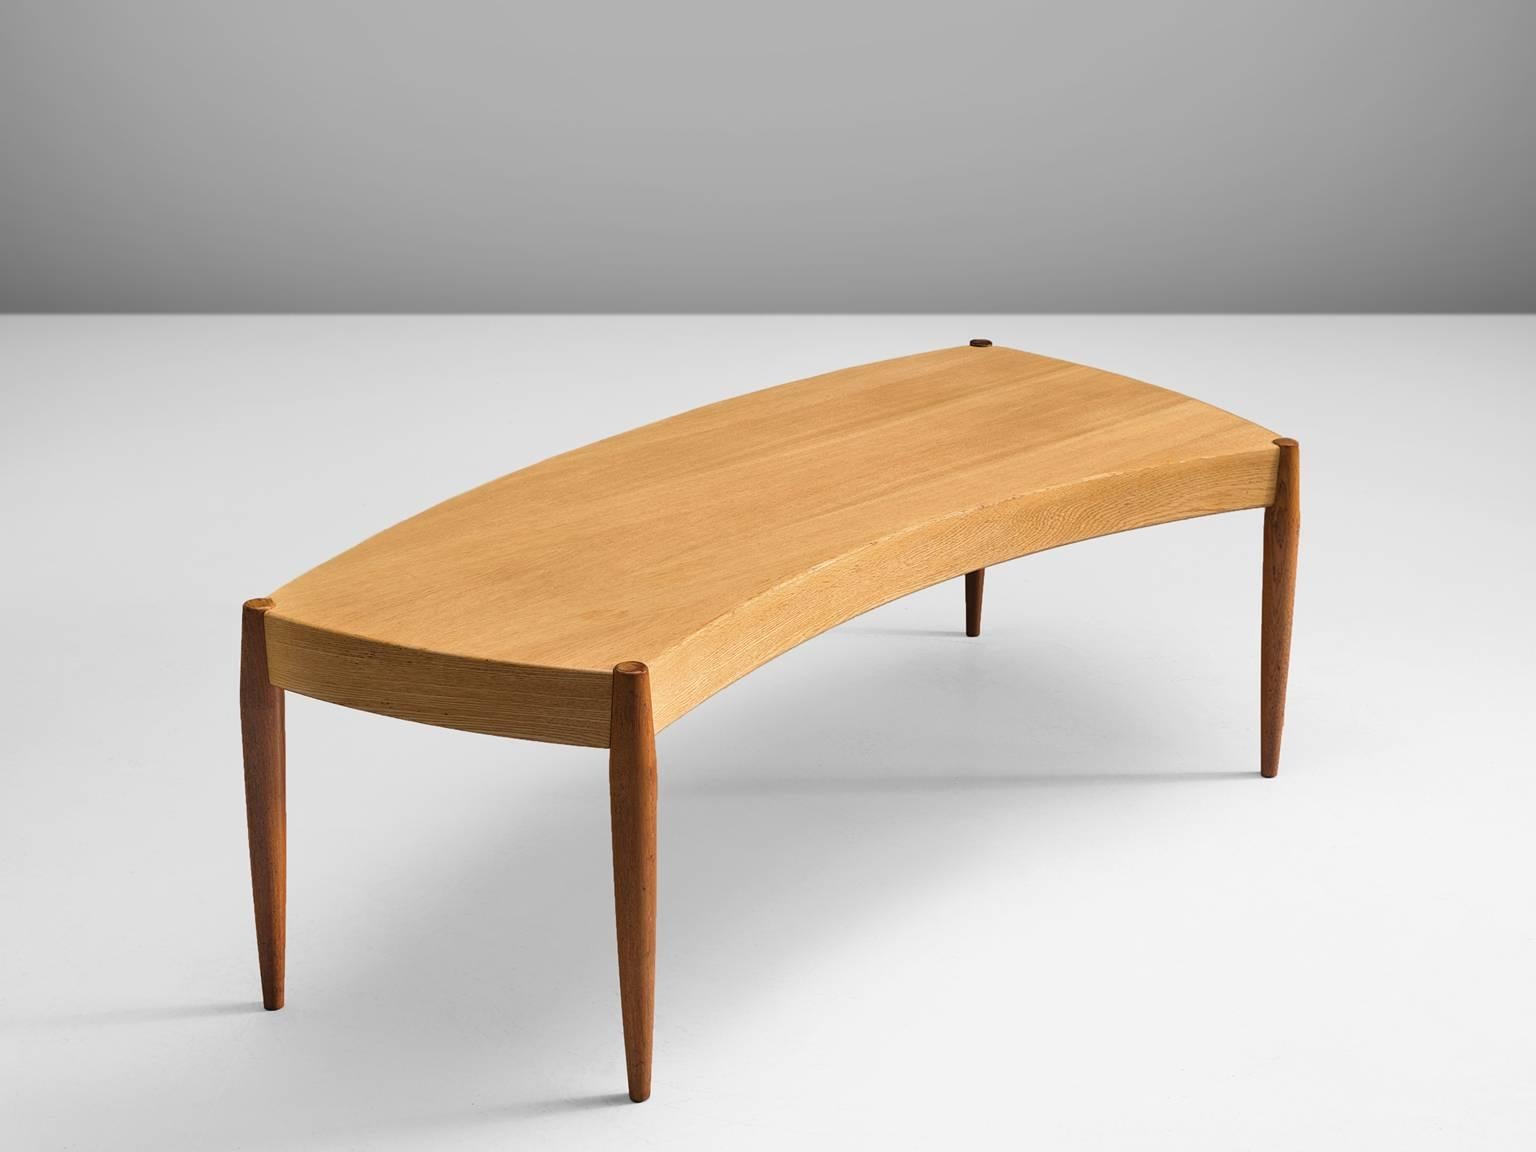 Side table, beech, teak, Scandinavia, 1950s

This bent table is executed with circular tapered teak legs and a curved blond wooden top. The contrast between the two types of colored wood in combination with the fluent shape of the table forms a